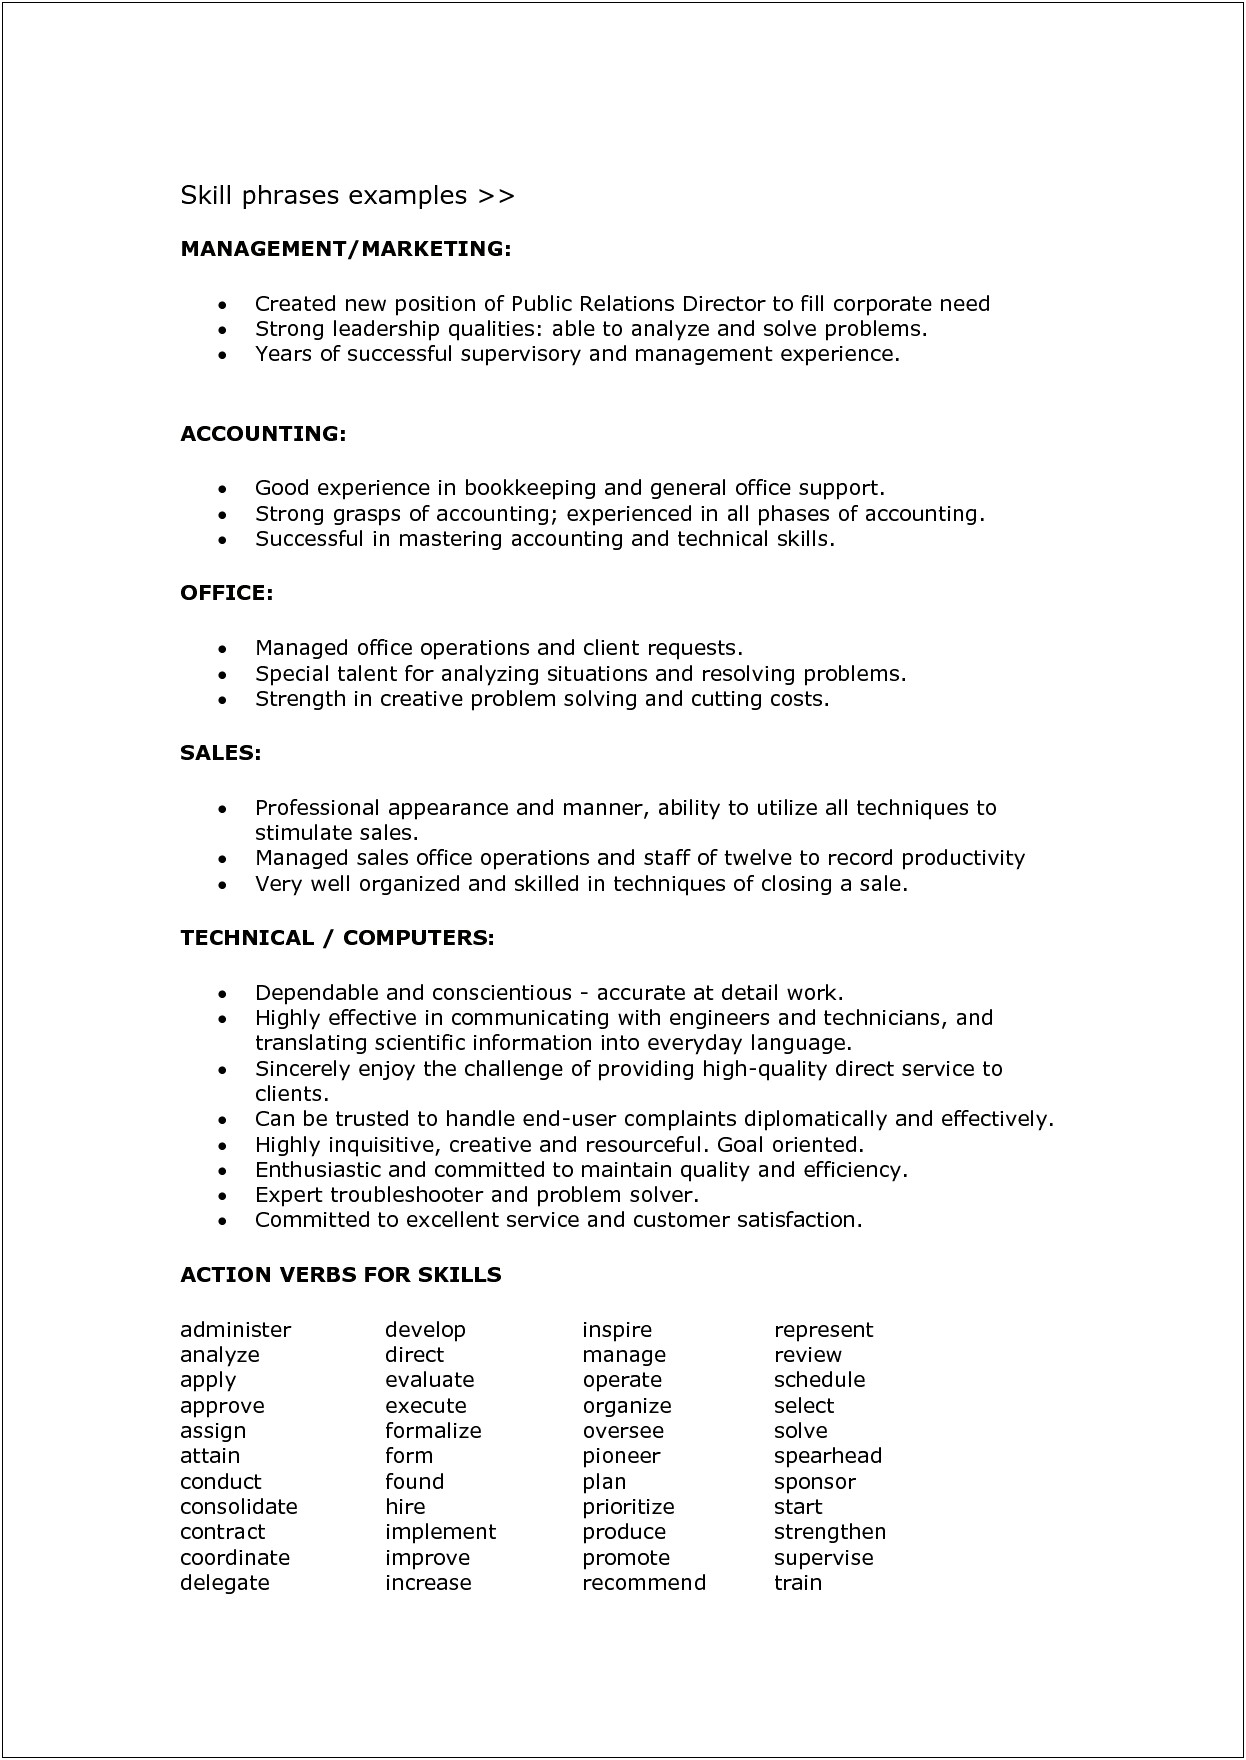 Technical Support Phrases To Put On Resume